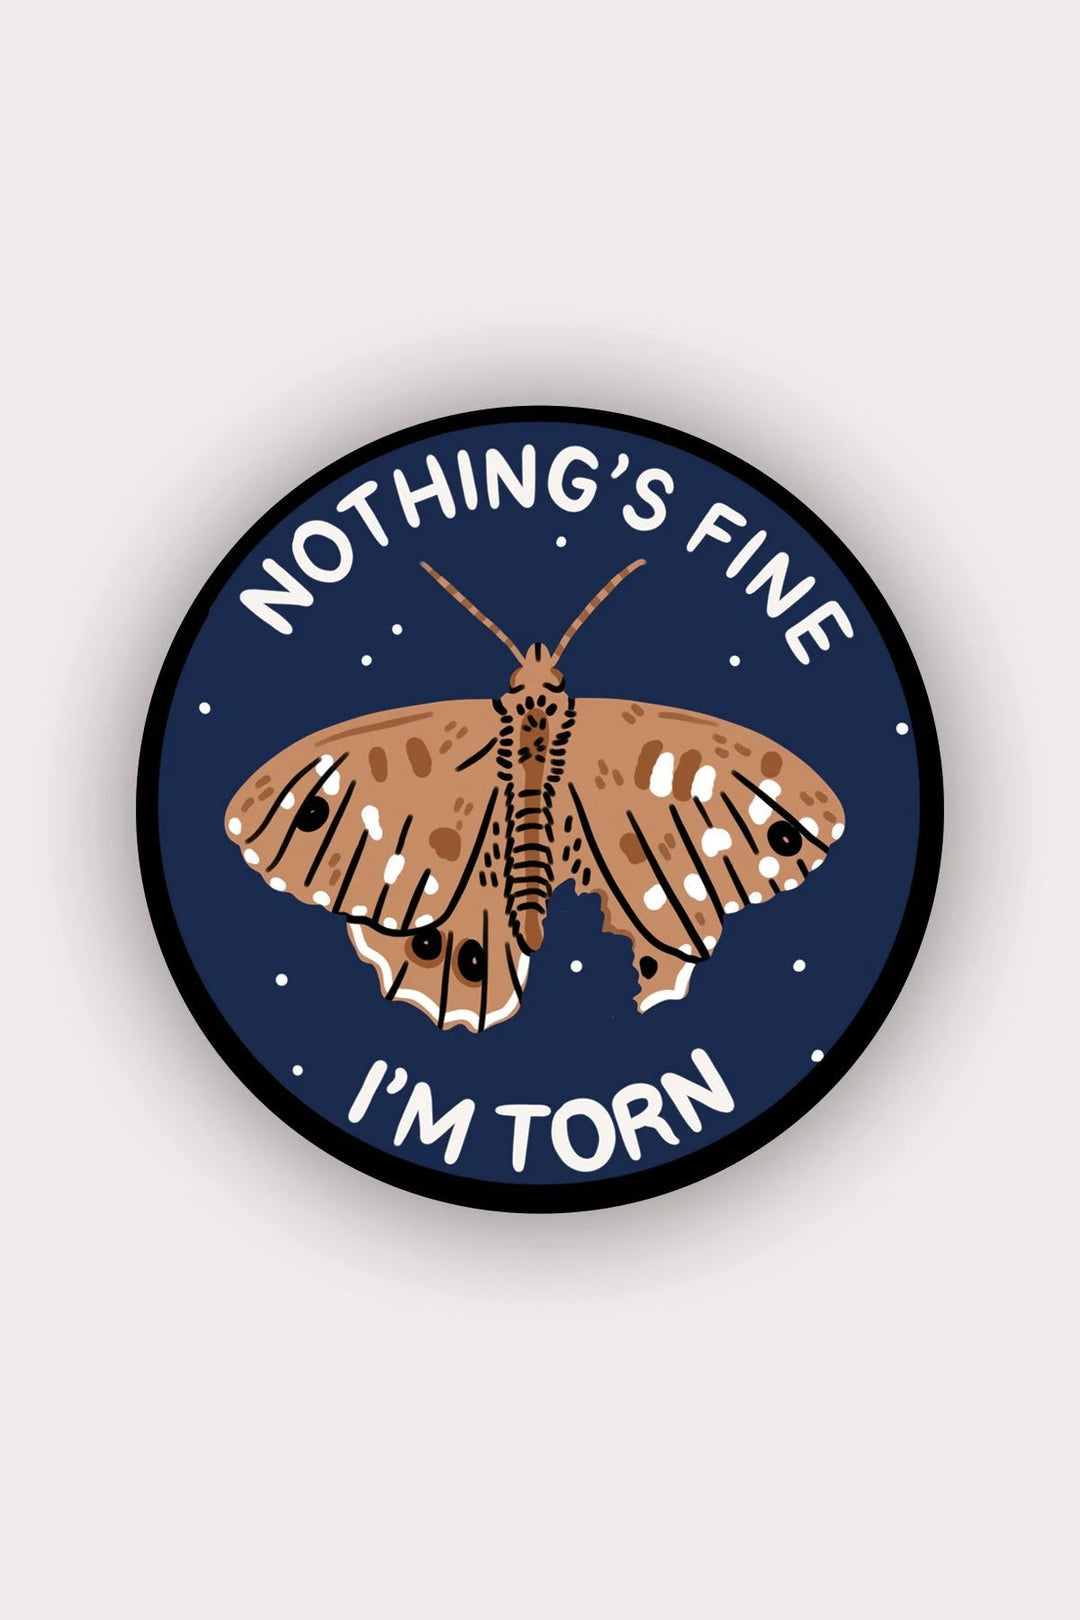 Nothing's Fine I'm Torn Sticker | Stay Home Club - Pretty by Her- handmade locally in Cambridge, Ontario